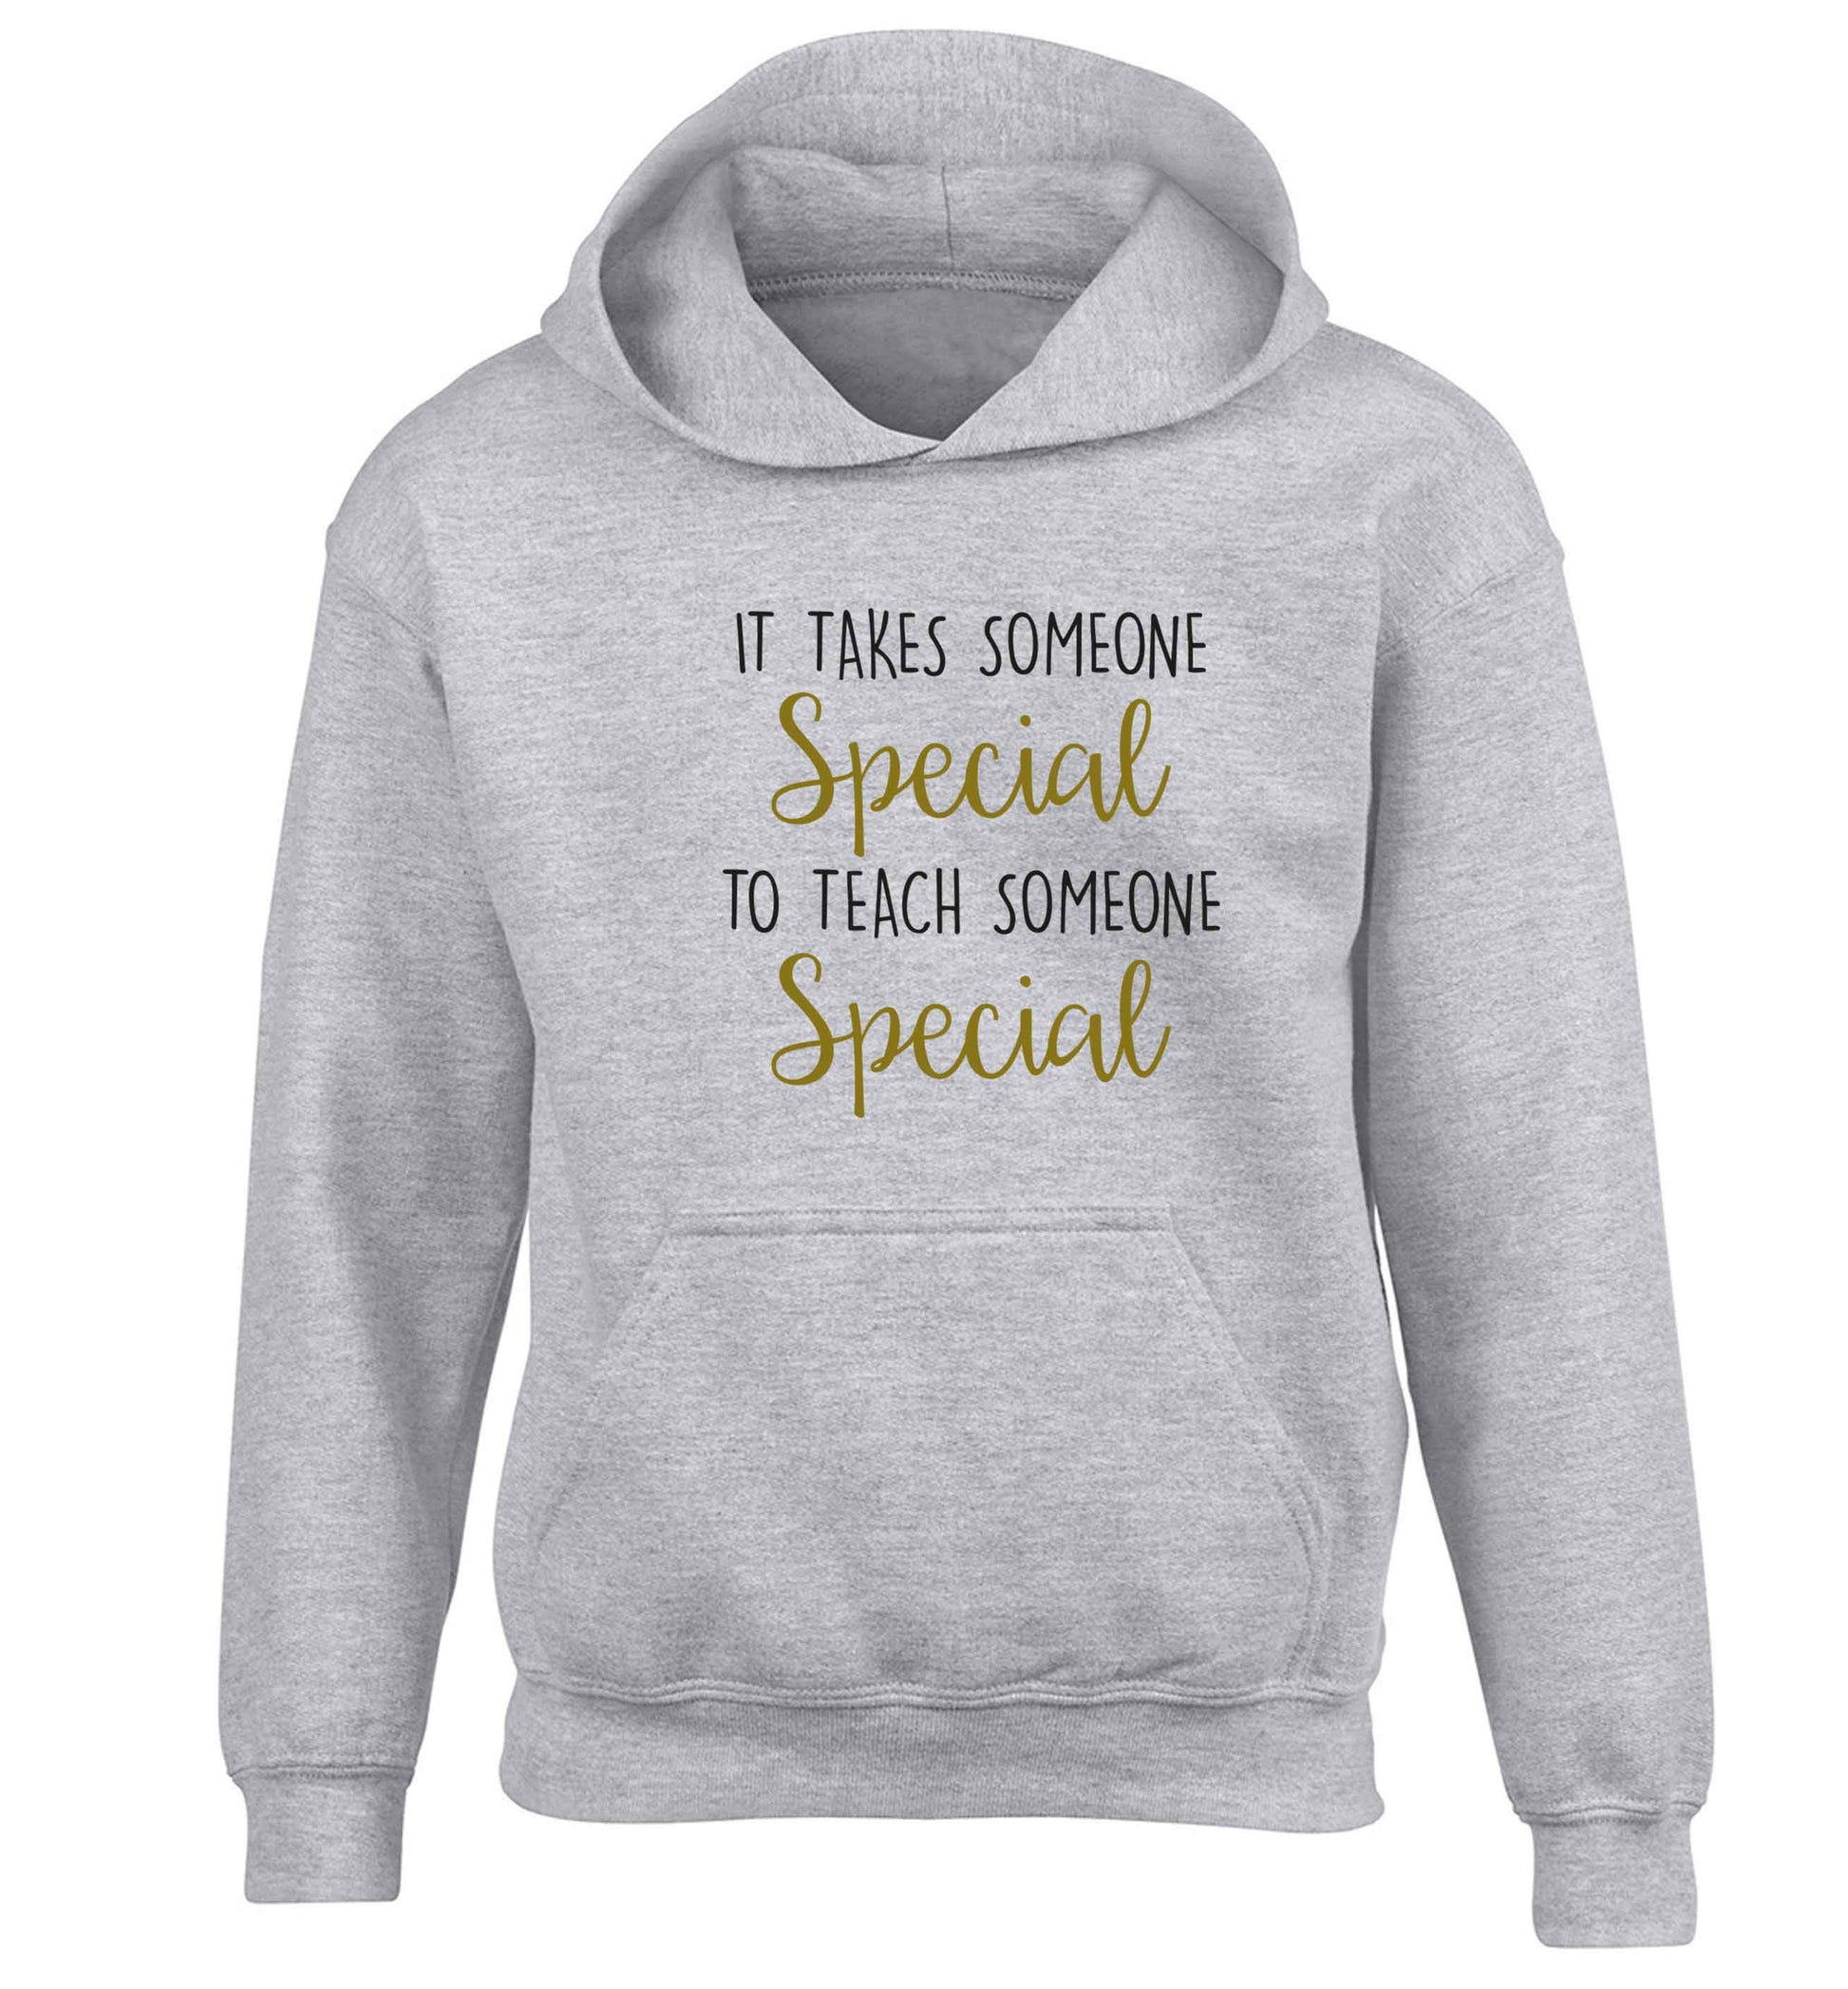 It takes someone special to teach someone special children's grey hoodie 12-13 Years